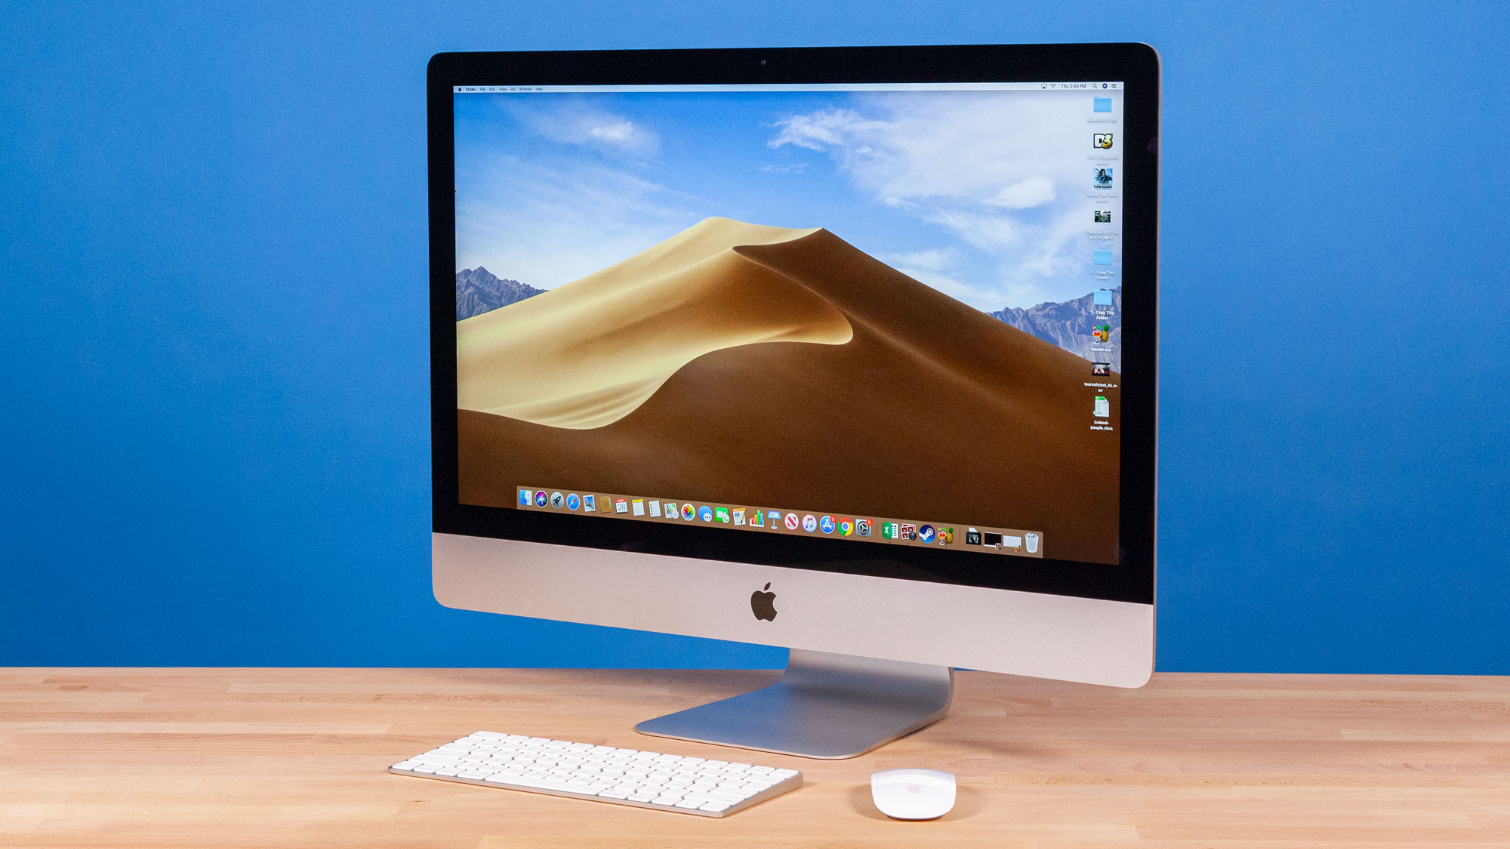 Apple iMac 27-inch Review (2019): Full Review and Benchmarks | Tom's Guide